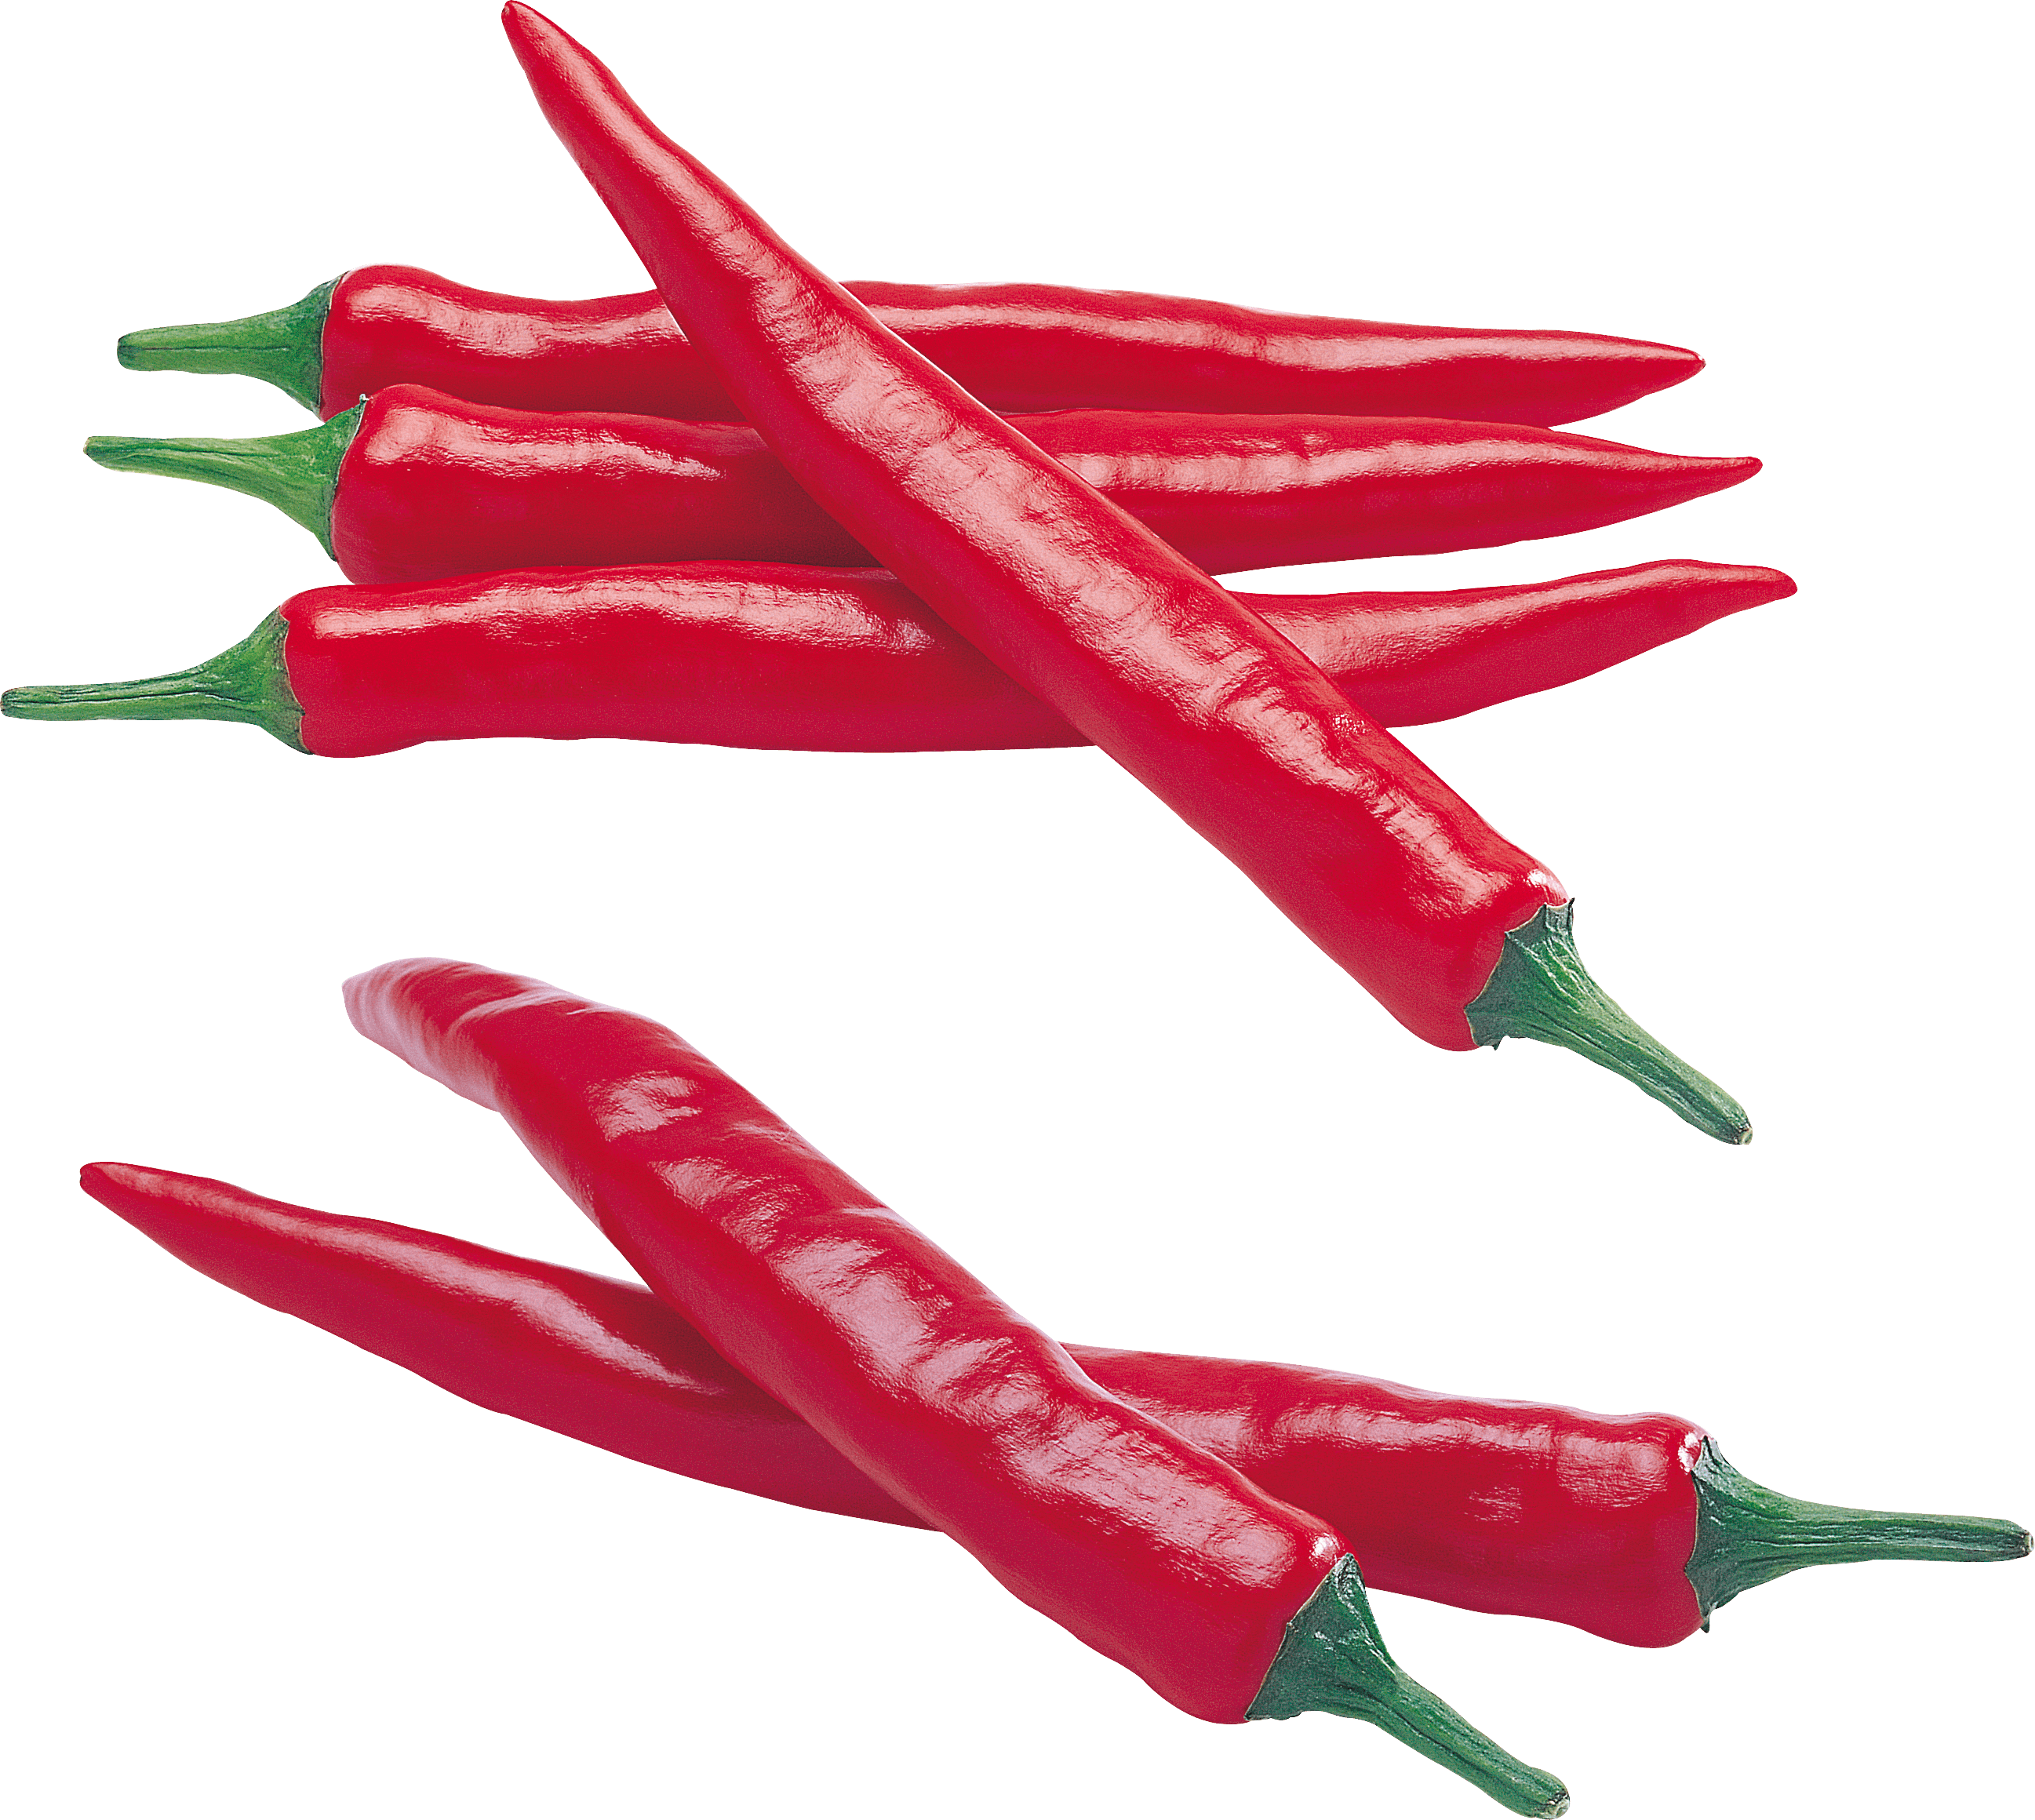 Download Red Chili Pepper Png Image HQ PNG Image | FreePNGImg